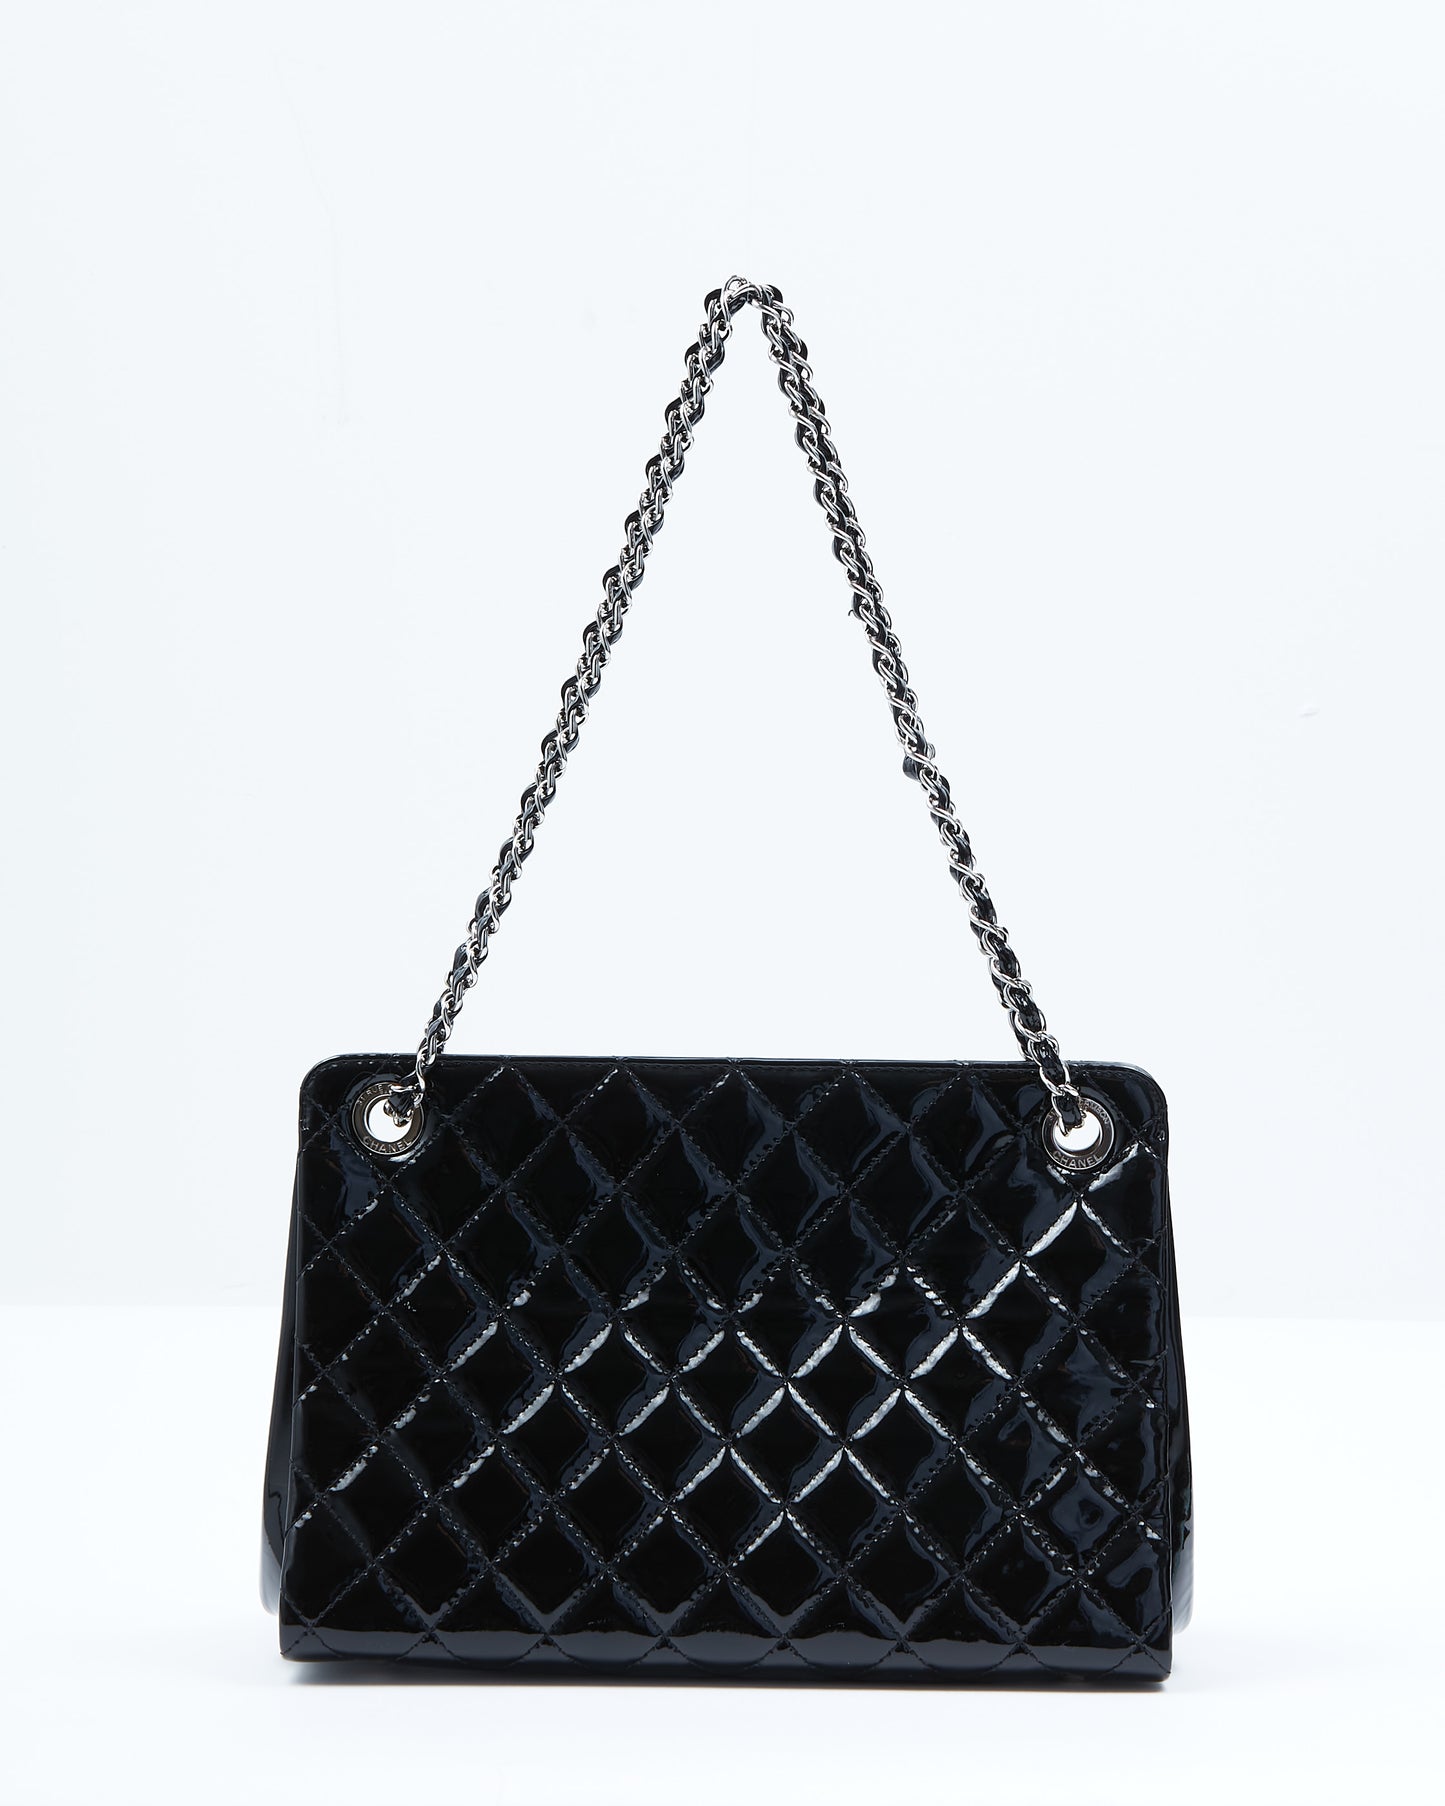 Chanel Black Patent Quilted CC Timeless Shopper Tote Chain Bag